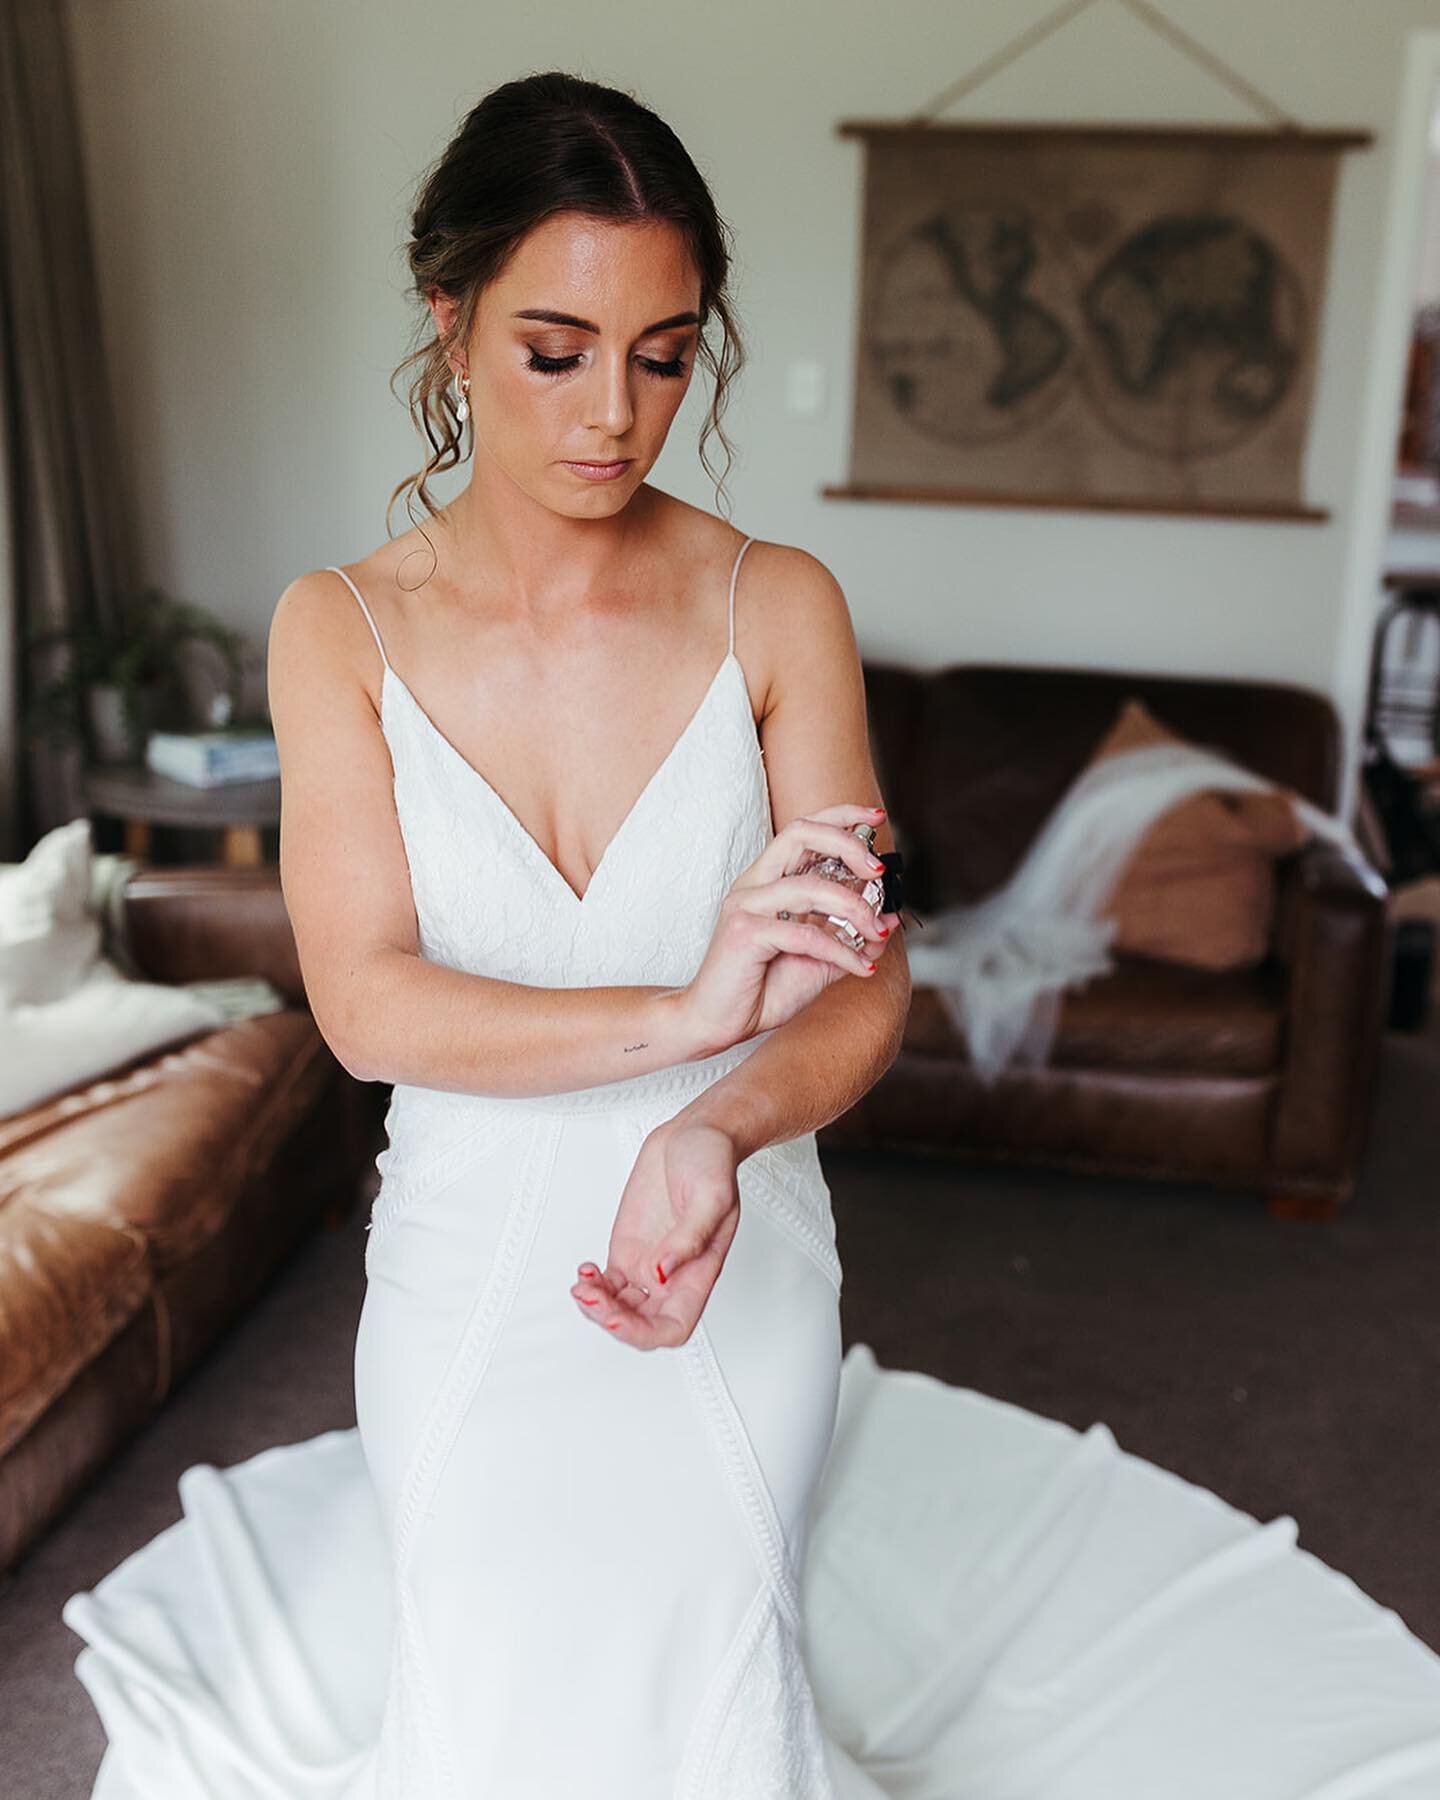 The beautiful Emma on her wedding day ✨ Such a beautiful person inside and out. 
Bride &amp; bridal party makeup by me @_kayleighcreates 
Hair by @oasis_hair_studio 
Photography @withhollykate 

I have very limited availability for the 2023/2024 wedd